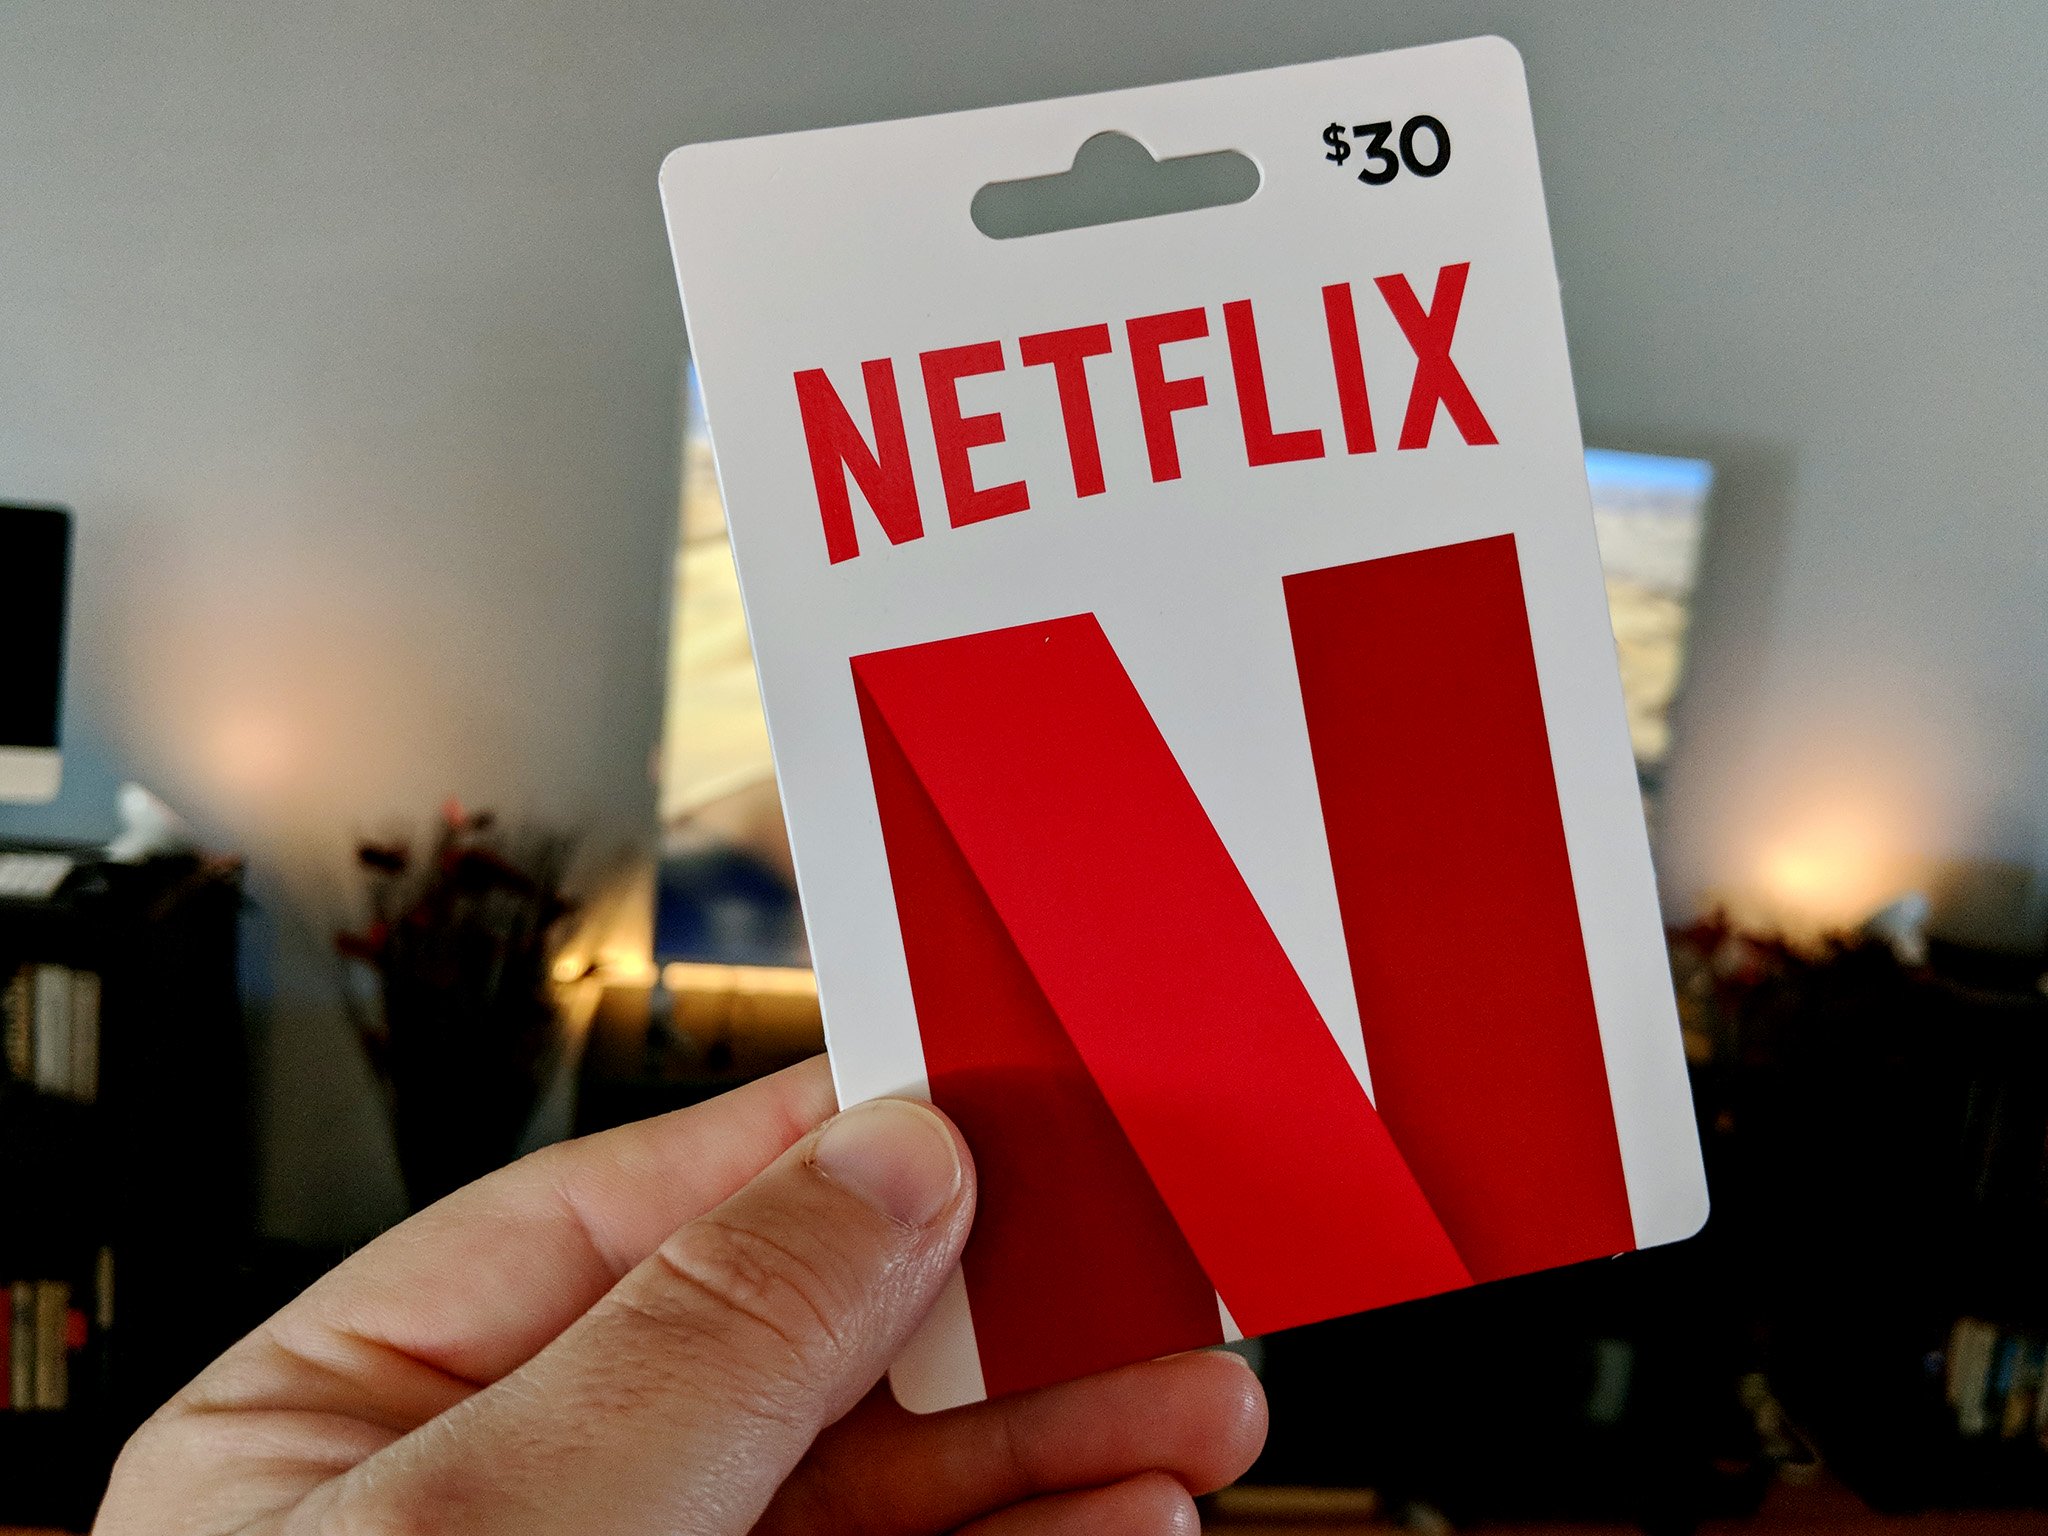 netflix gift card prices